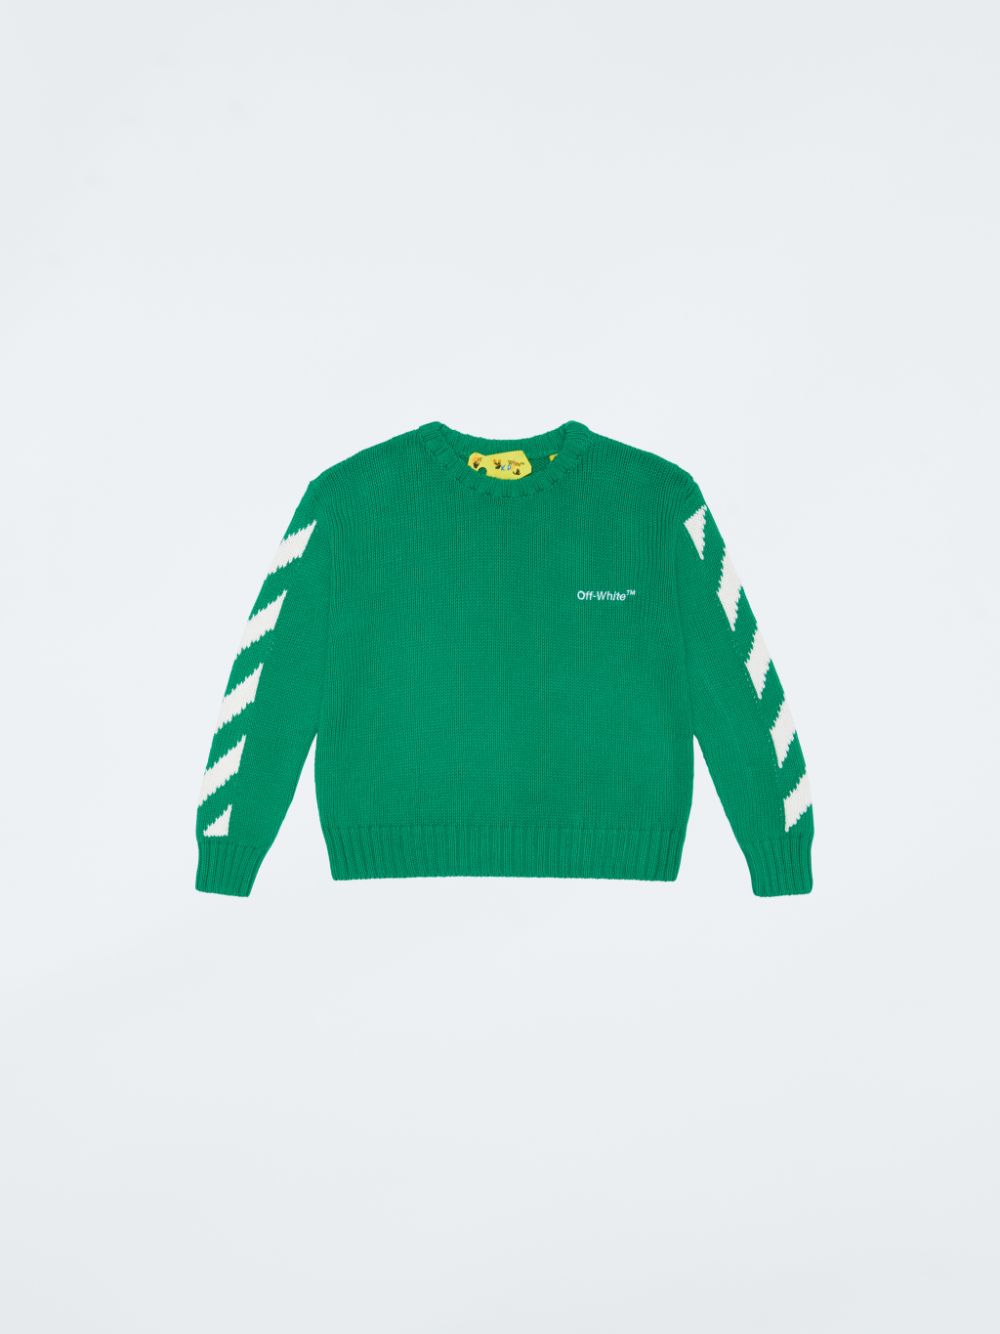 OFF HELVETICA SWEATER in green | Off-White™ Official TV